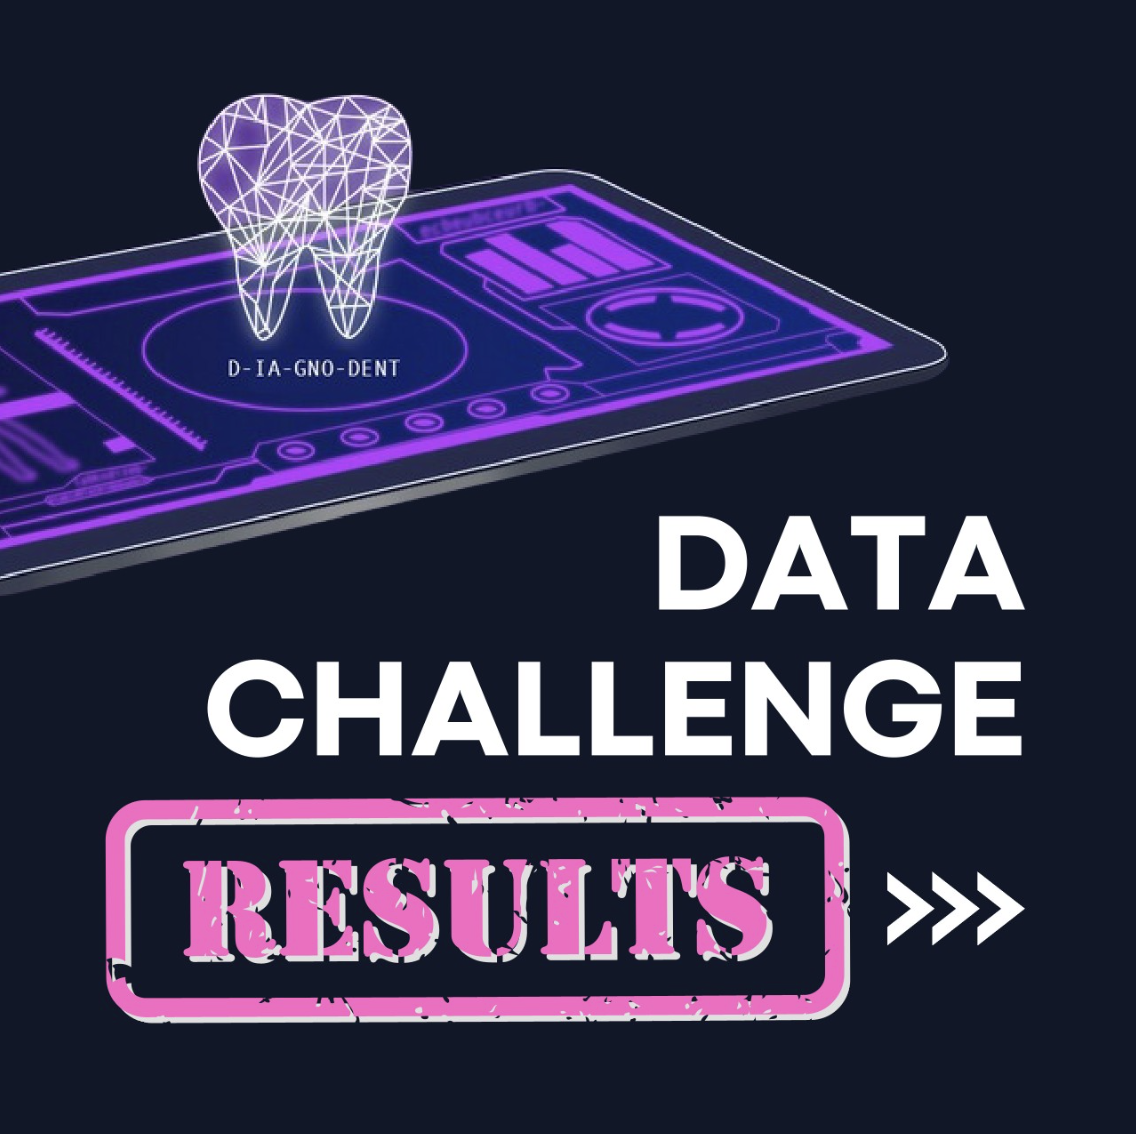 Announcing the winners of the D-IA-GNO-DENT data challenge!